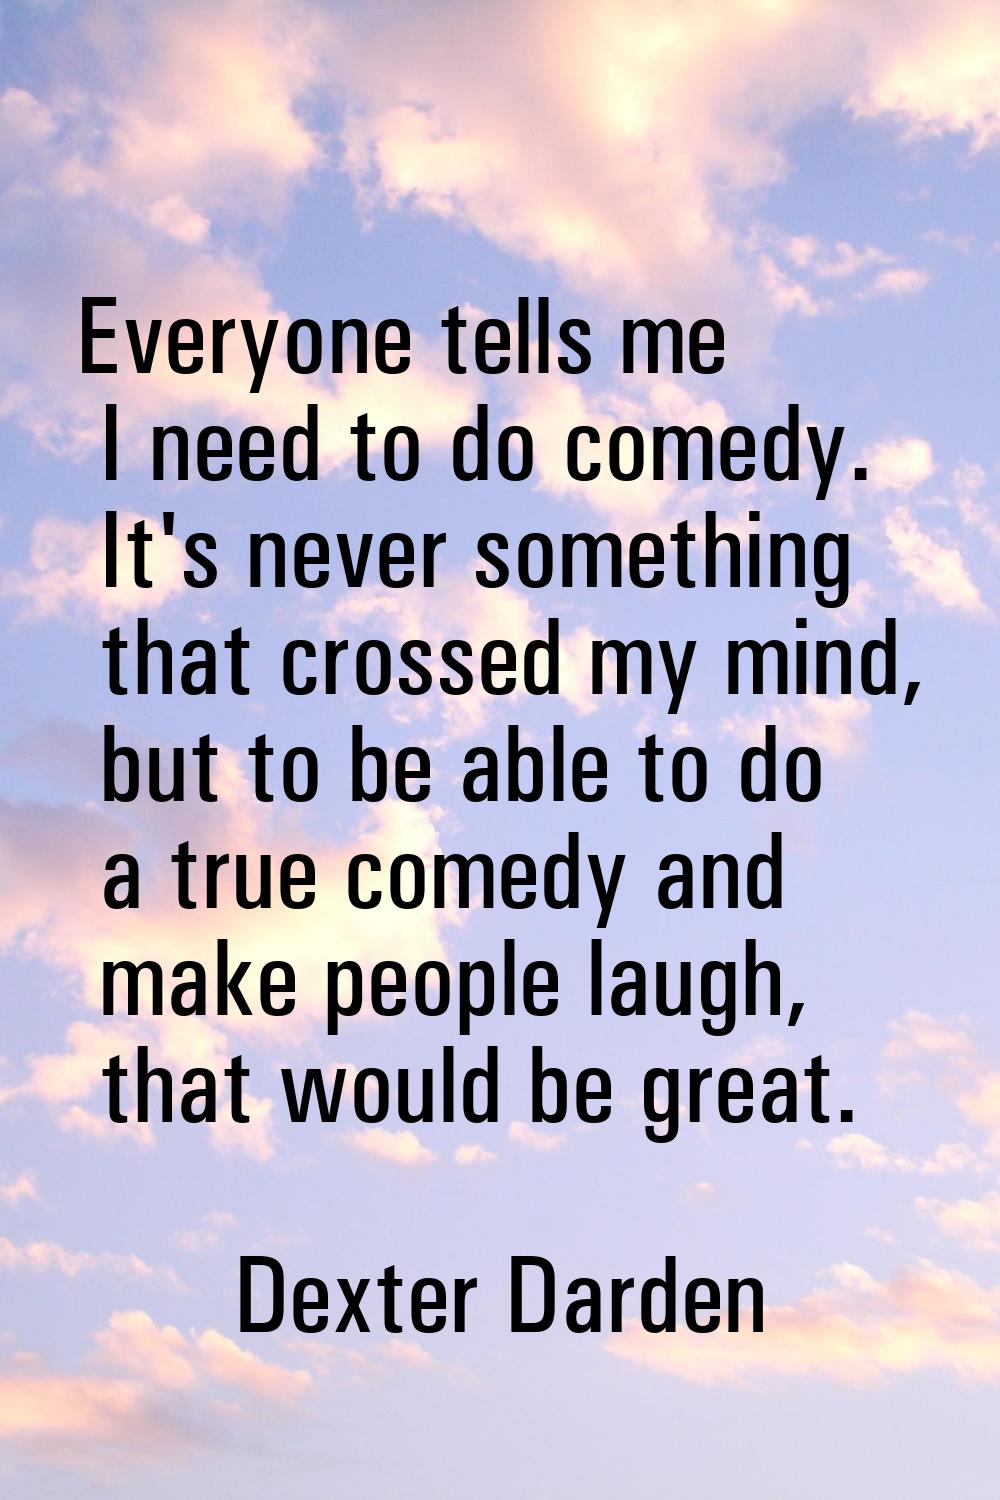 Everyone tells me I need to do comedy. It's never something that crossed my mind, but to be able to